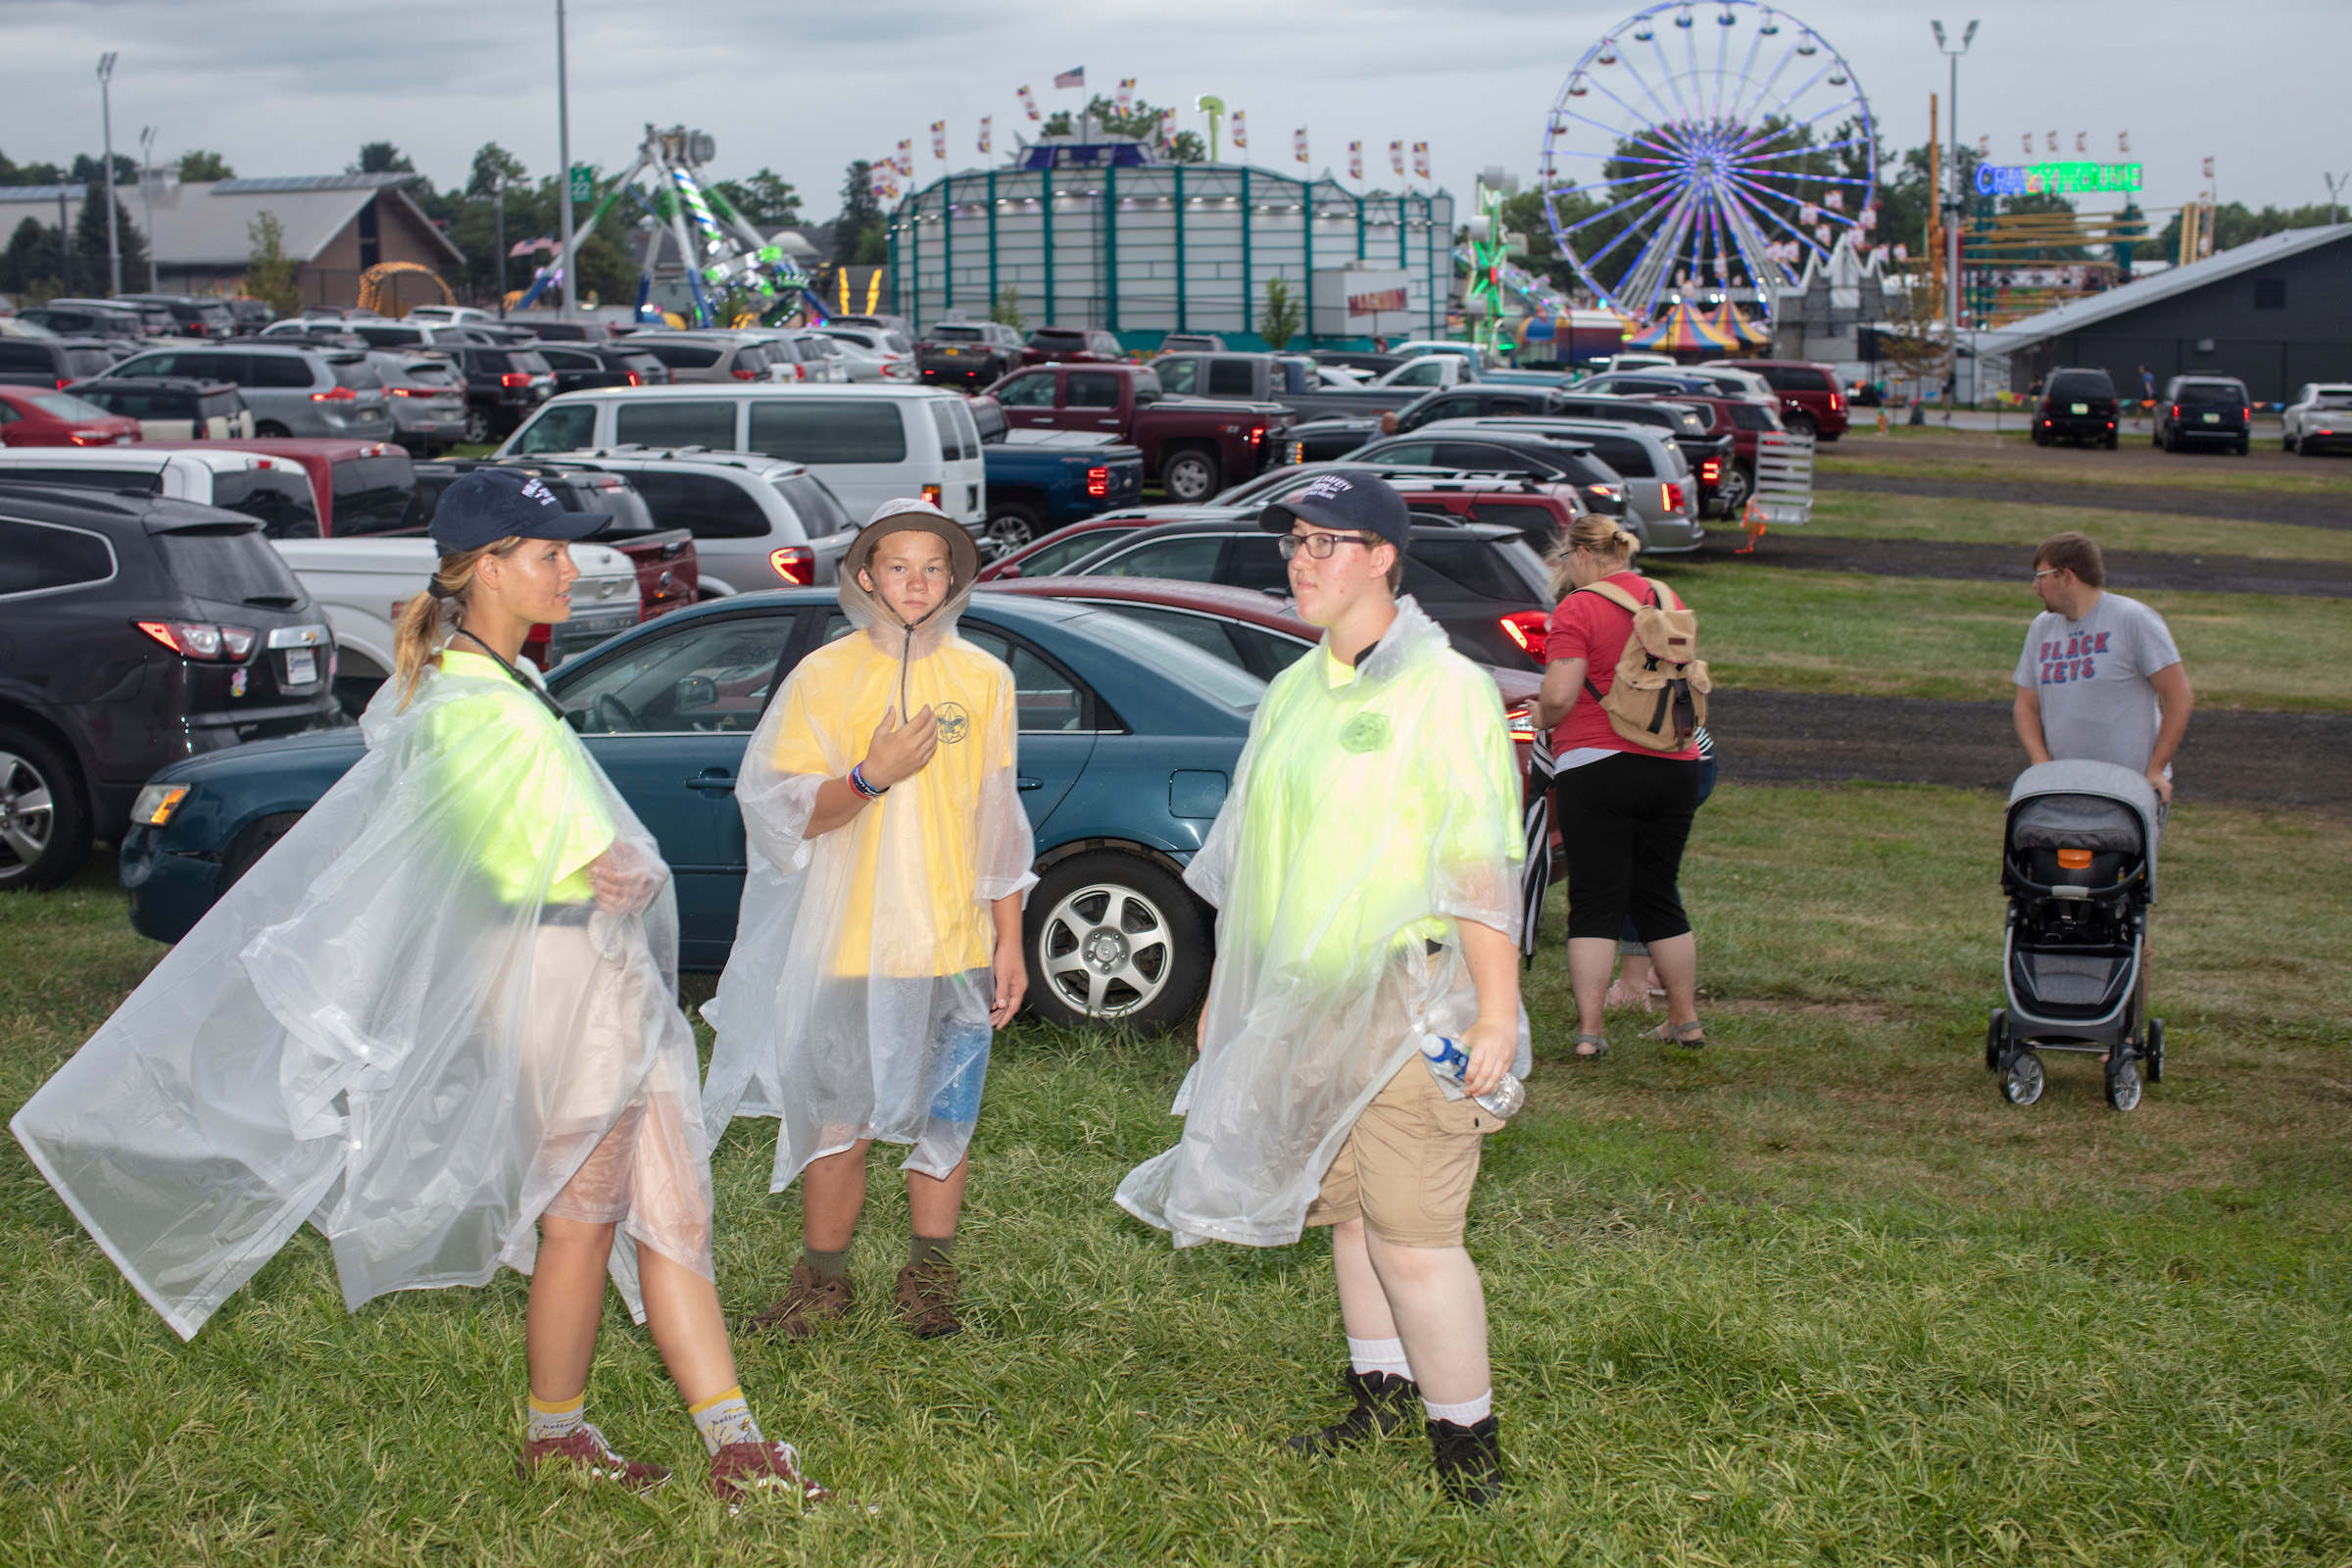 Parking attendants wait for cars at the Iowa State Fair on Aug. 11. (M. Scott Brauer for TIME)